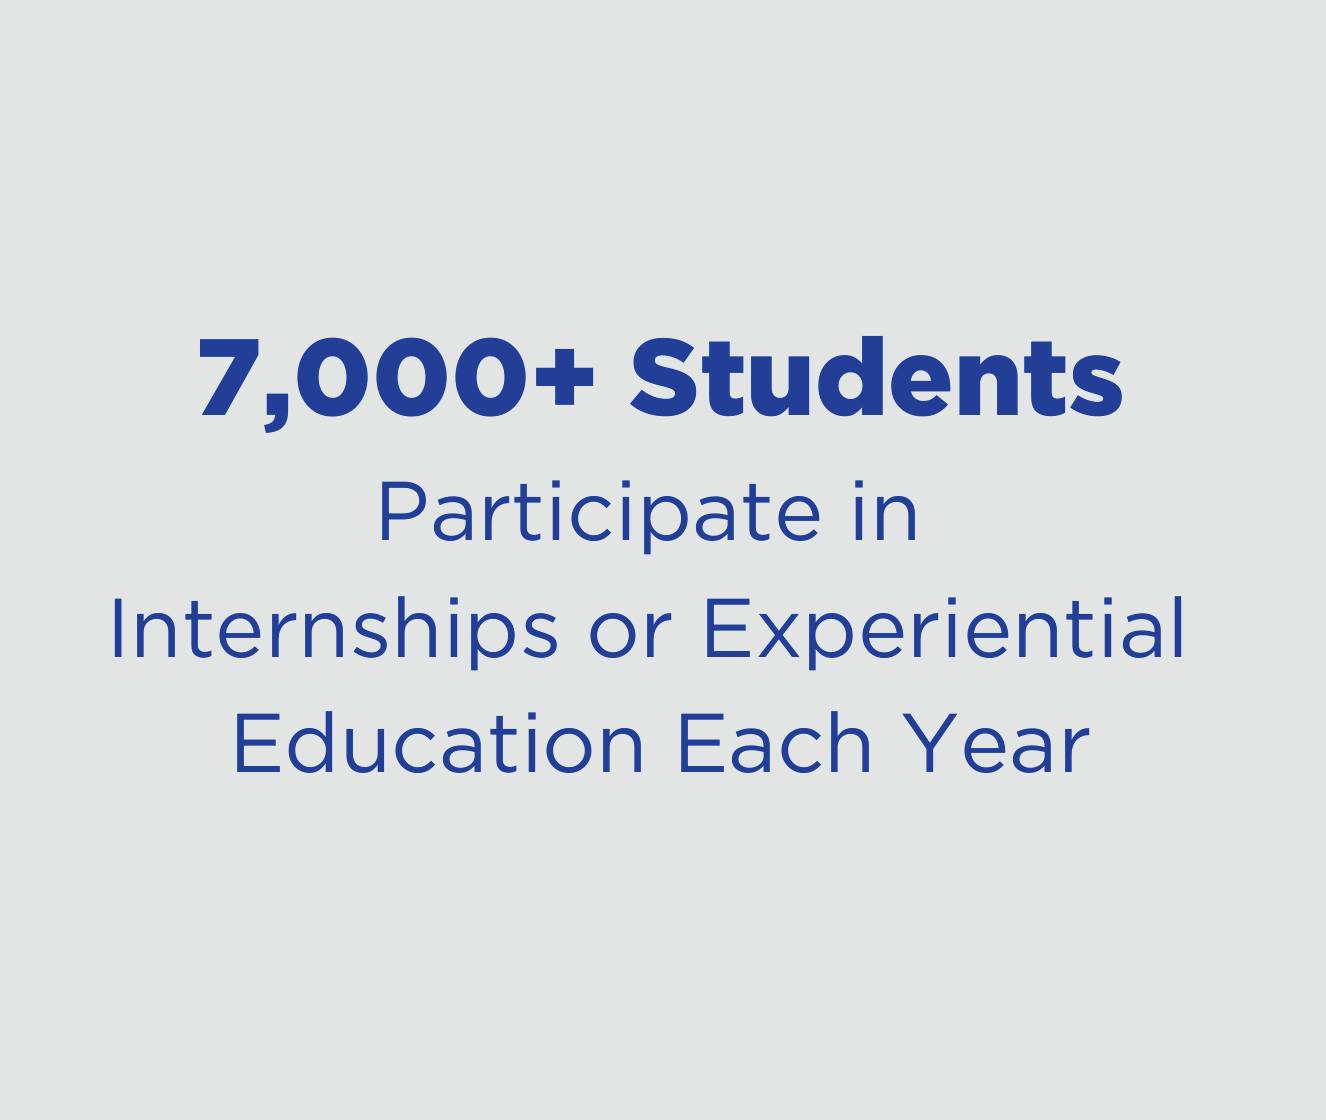 7,000+ students participate in internships each year